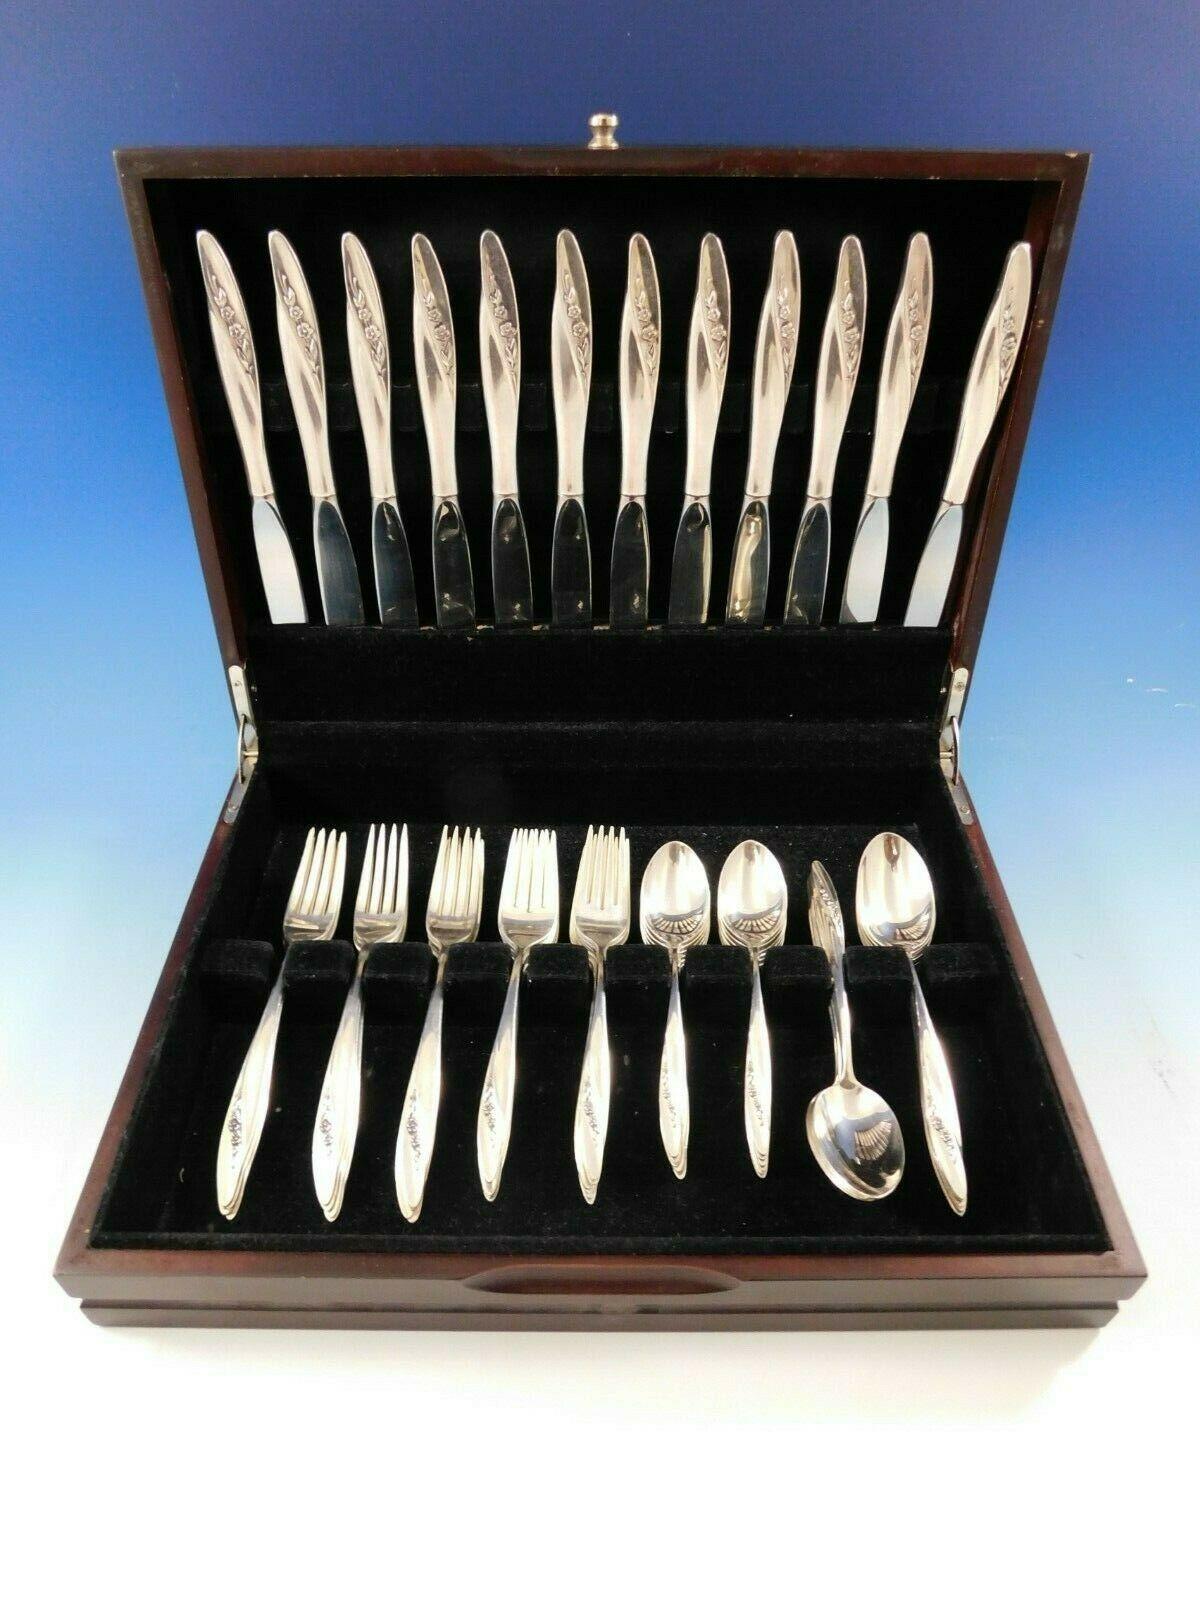 Stunning Blithe Spirit by Gorham sterling silver flatware set, 60 pieces. This set includes:

12 knives, 9 1/4